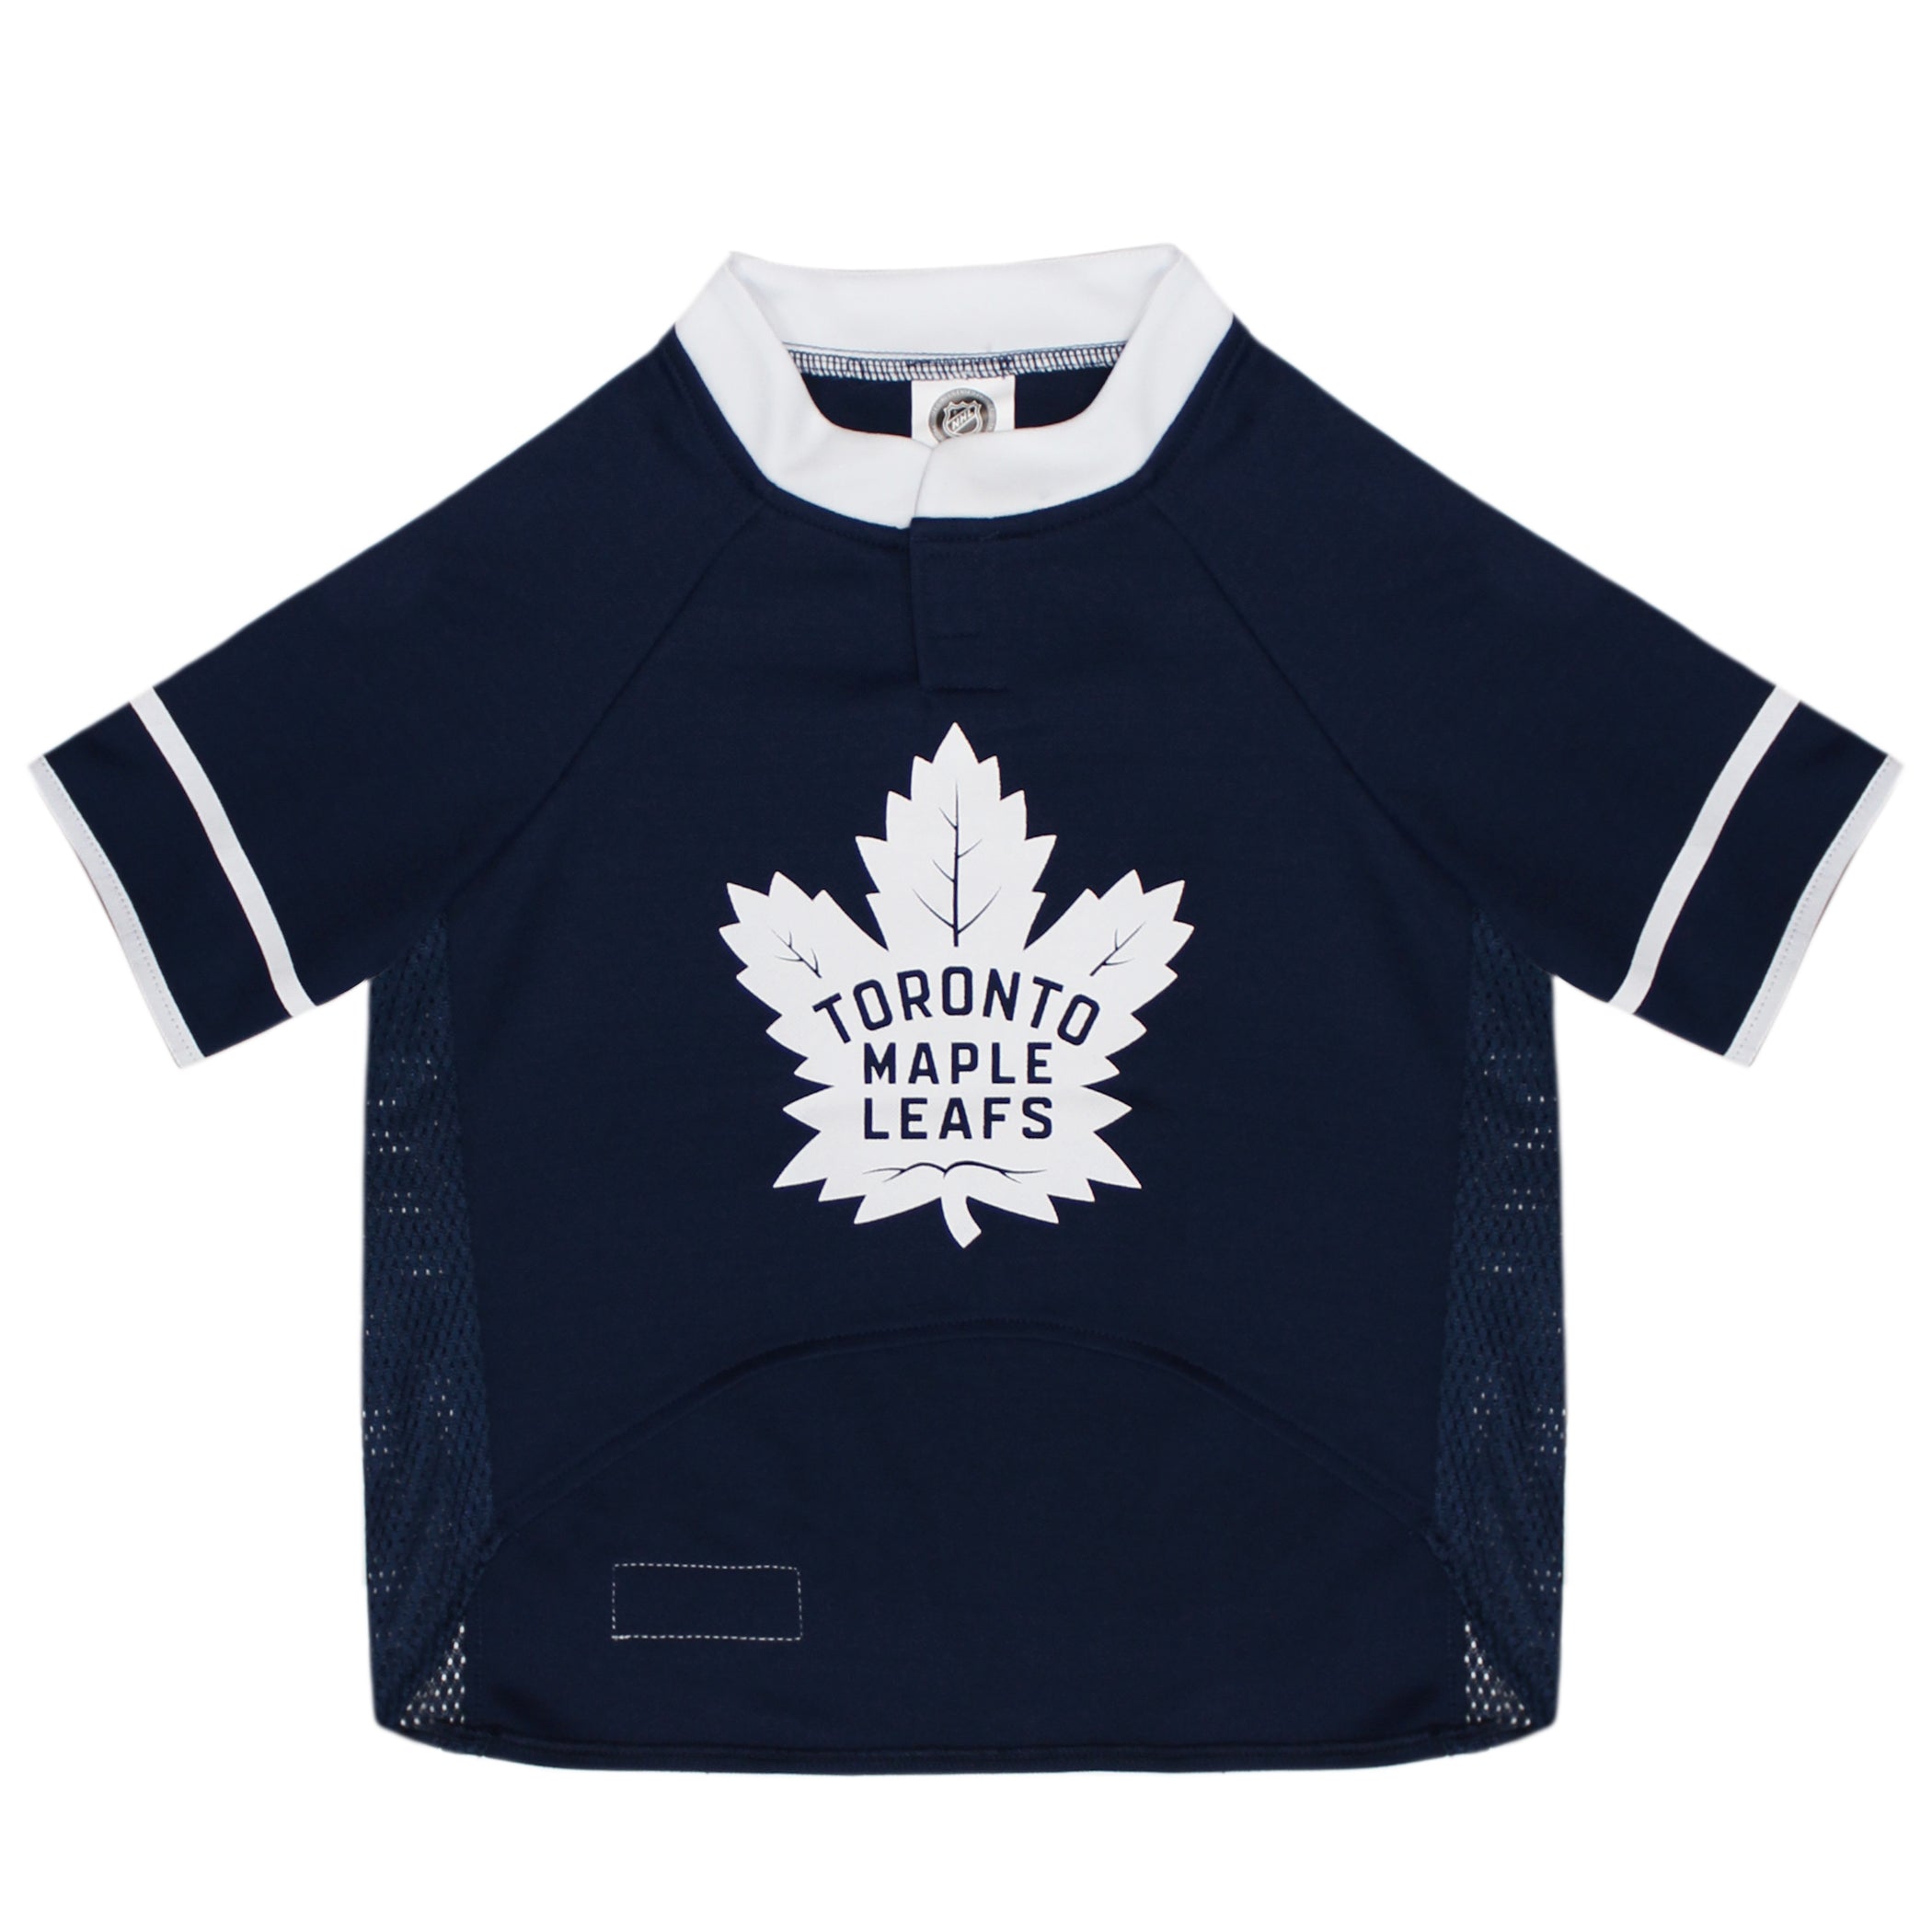 Toronto Maple Leafs sports pet supplies for dogs